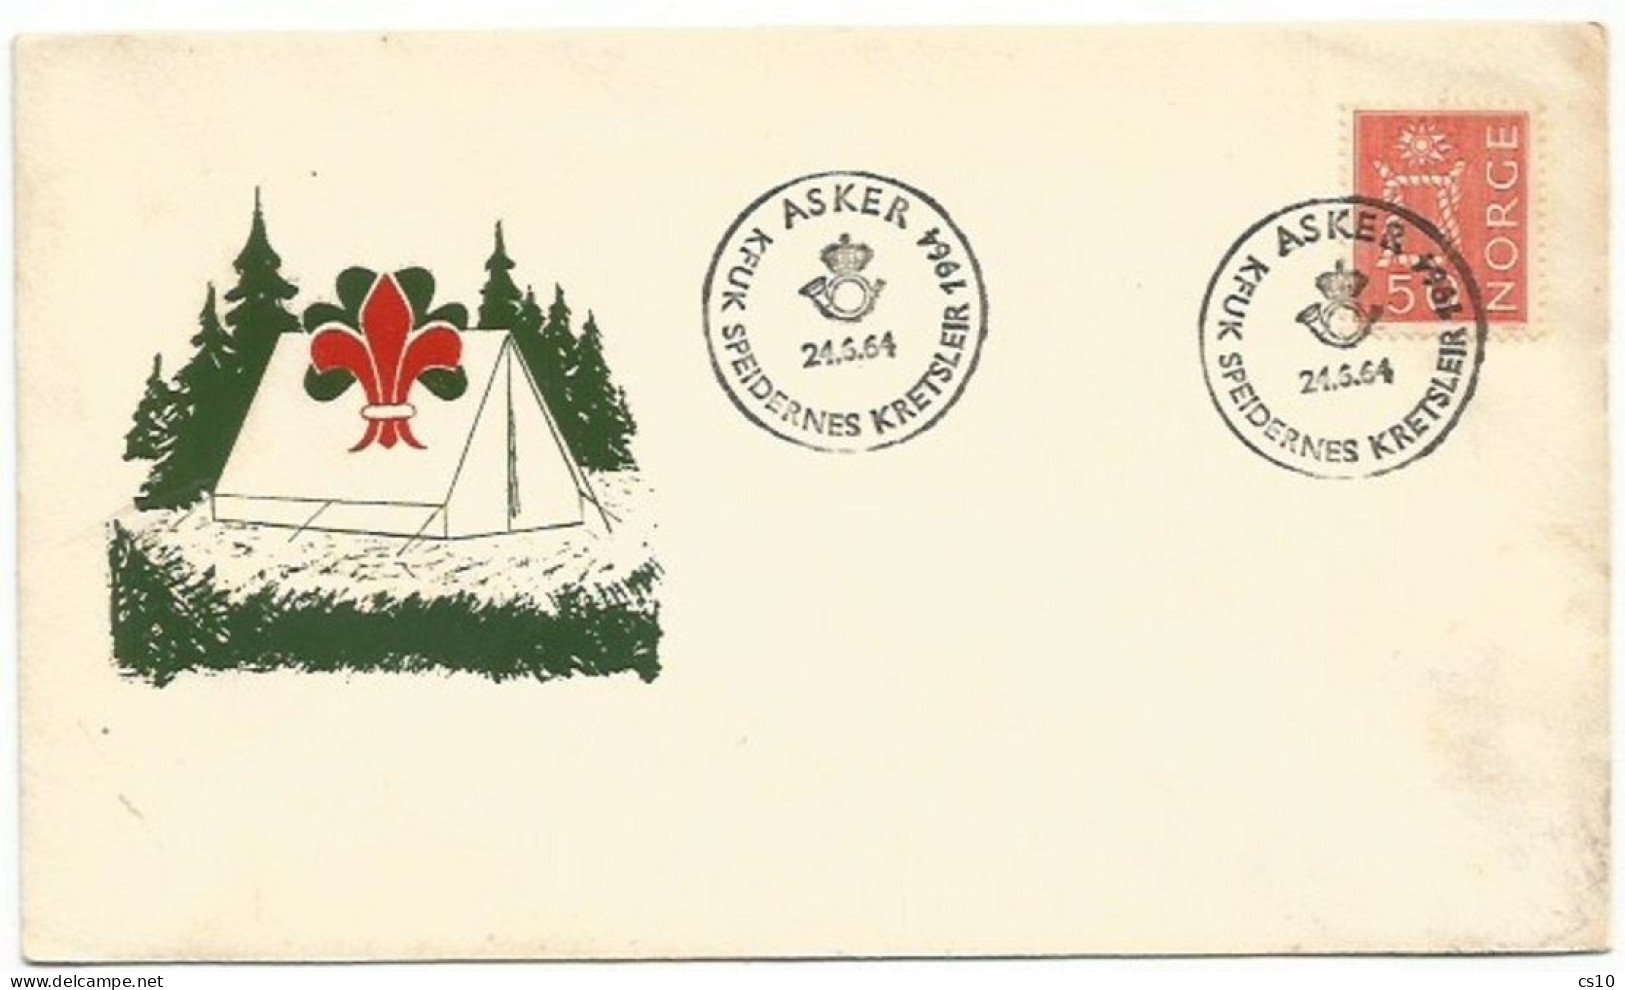 Scout Explorers Camp In Norway - Special Cachet Asker 24jun1964 On Official CV - Covers & Documents